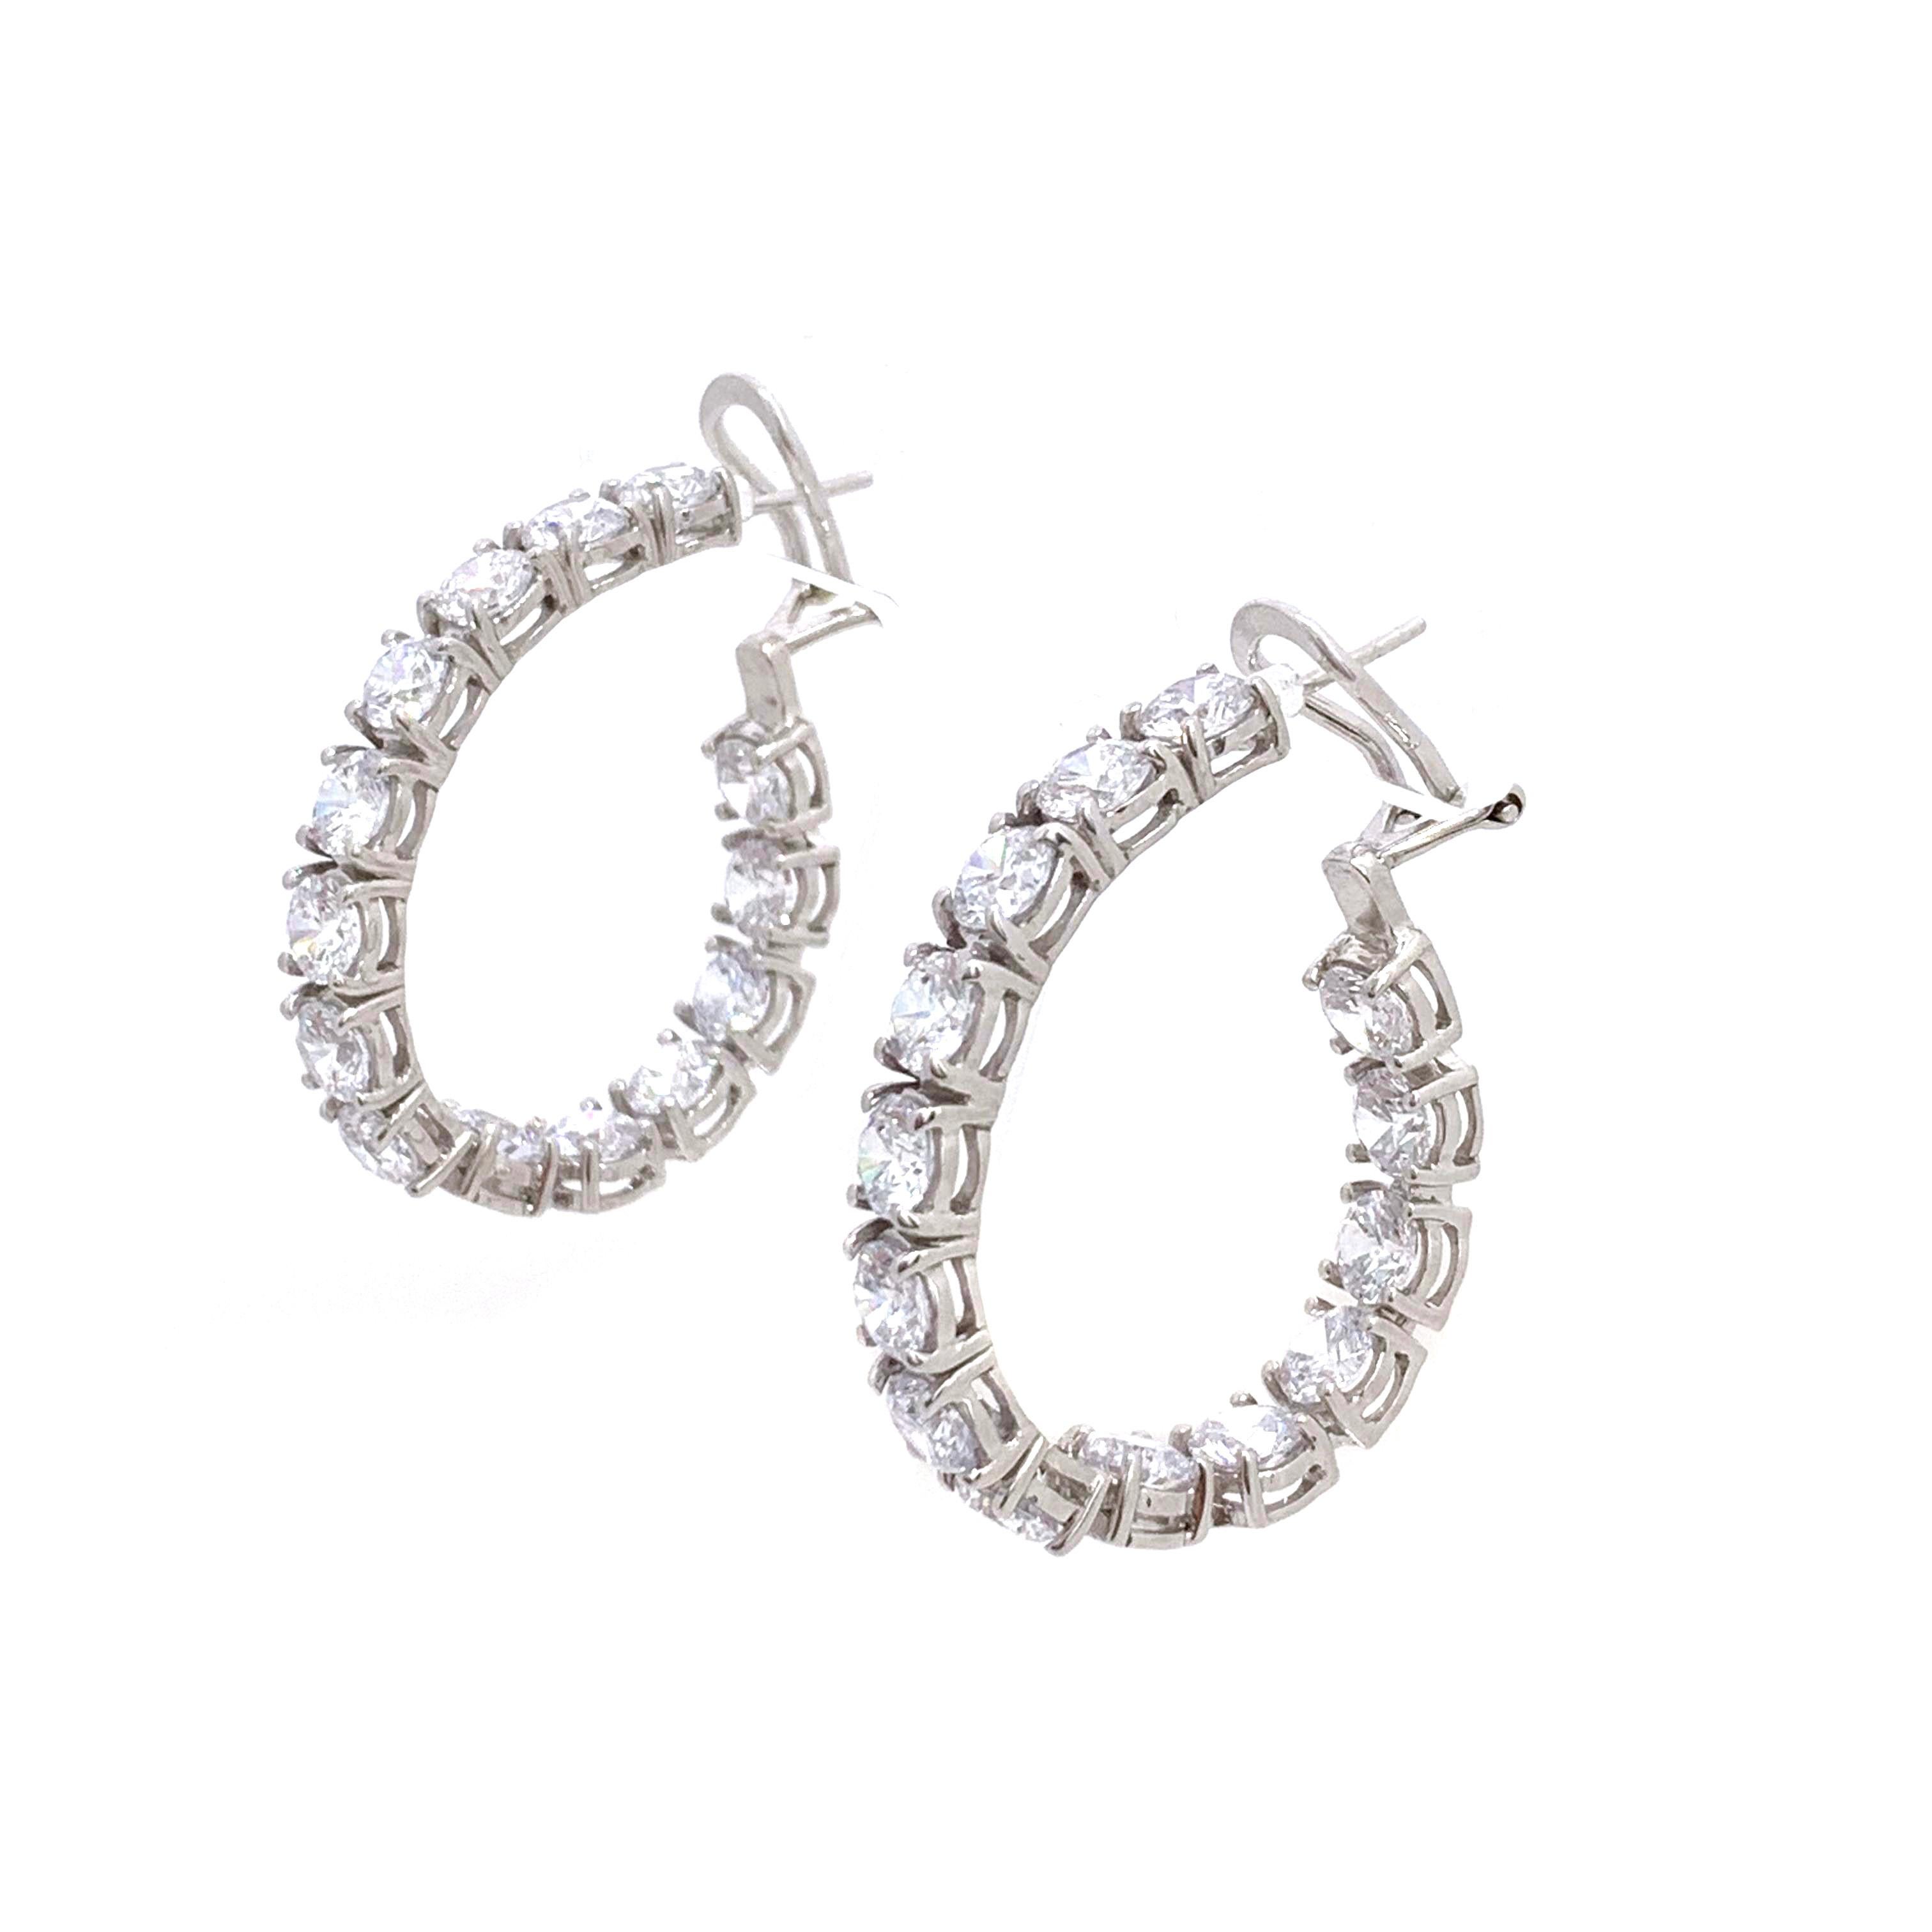 Contemporary Stunning Faux Diamond Sterling Silver Hoop Earrings